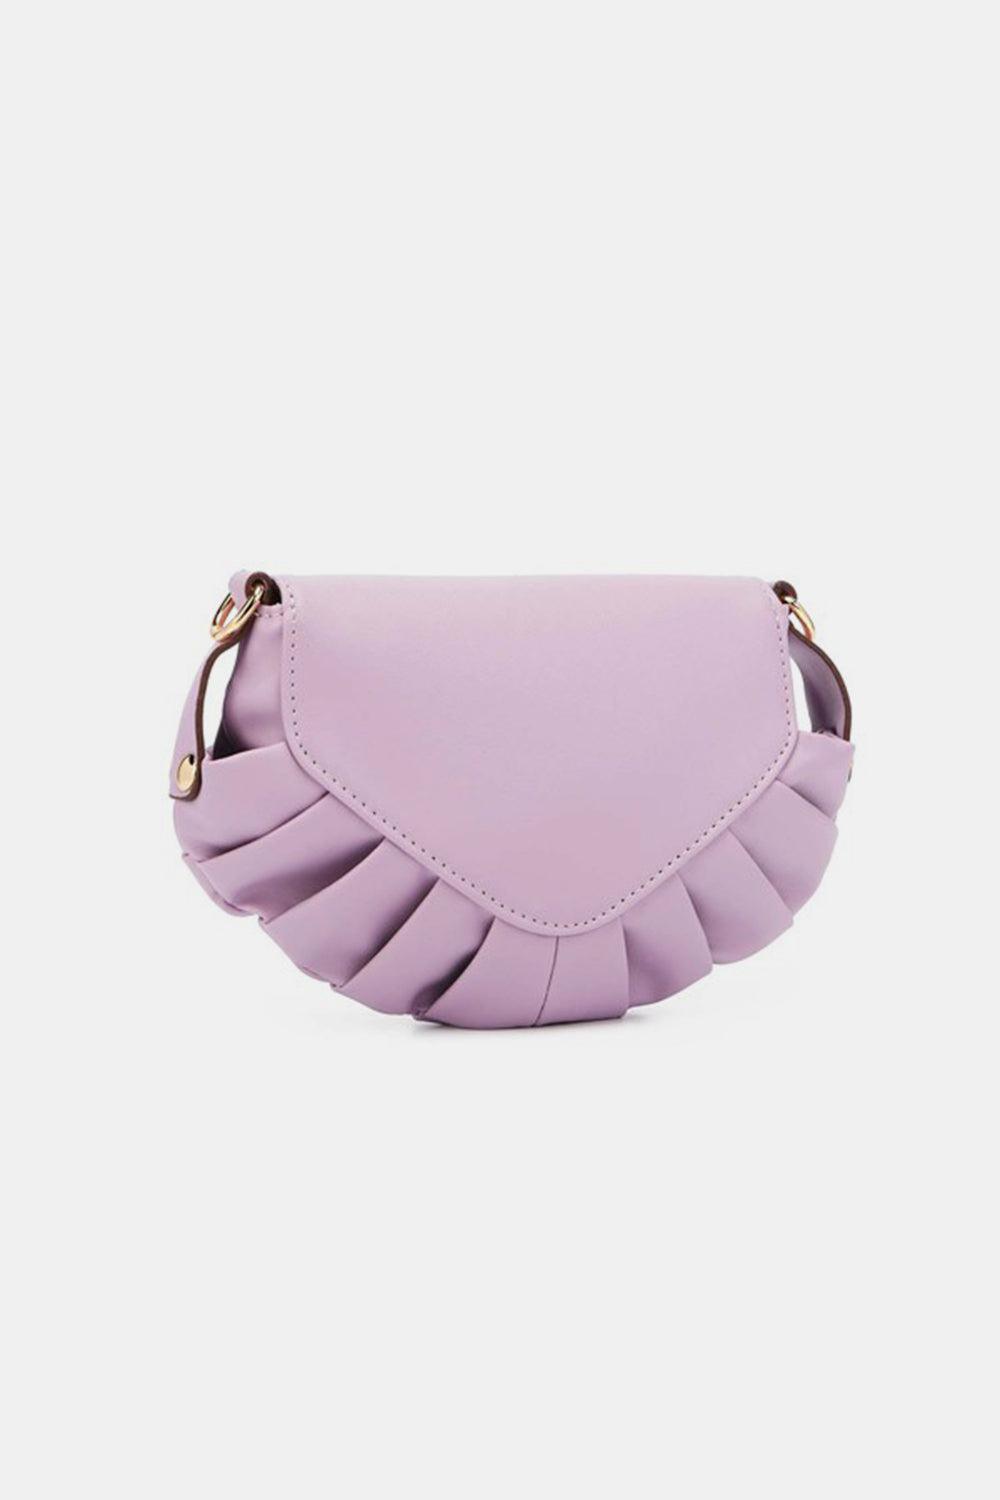 a small purple purse with a tasselled handle